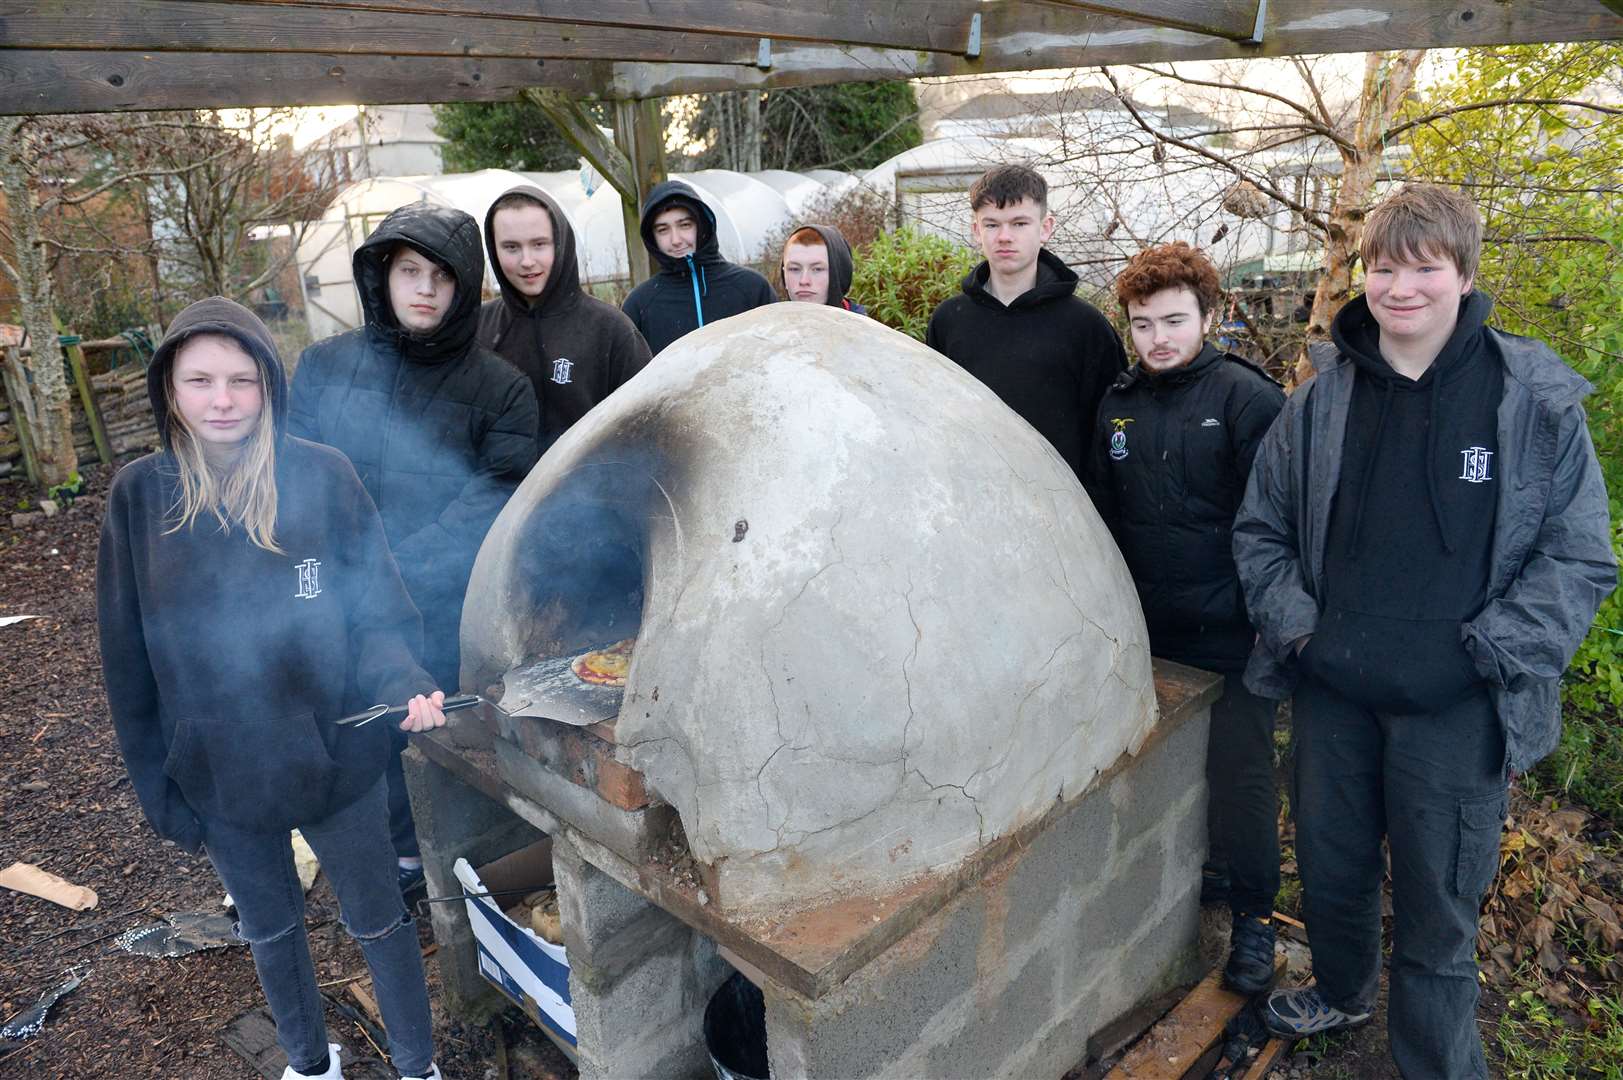 Inverness High School students with pizza oven built as part of school's food education.